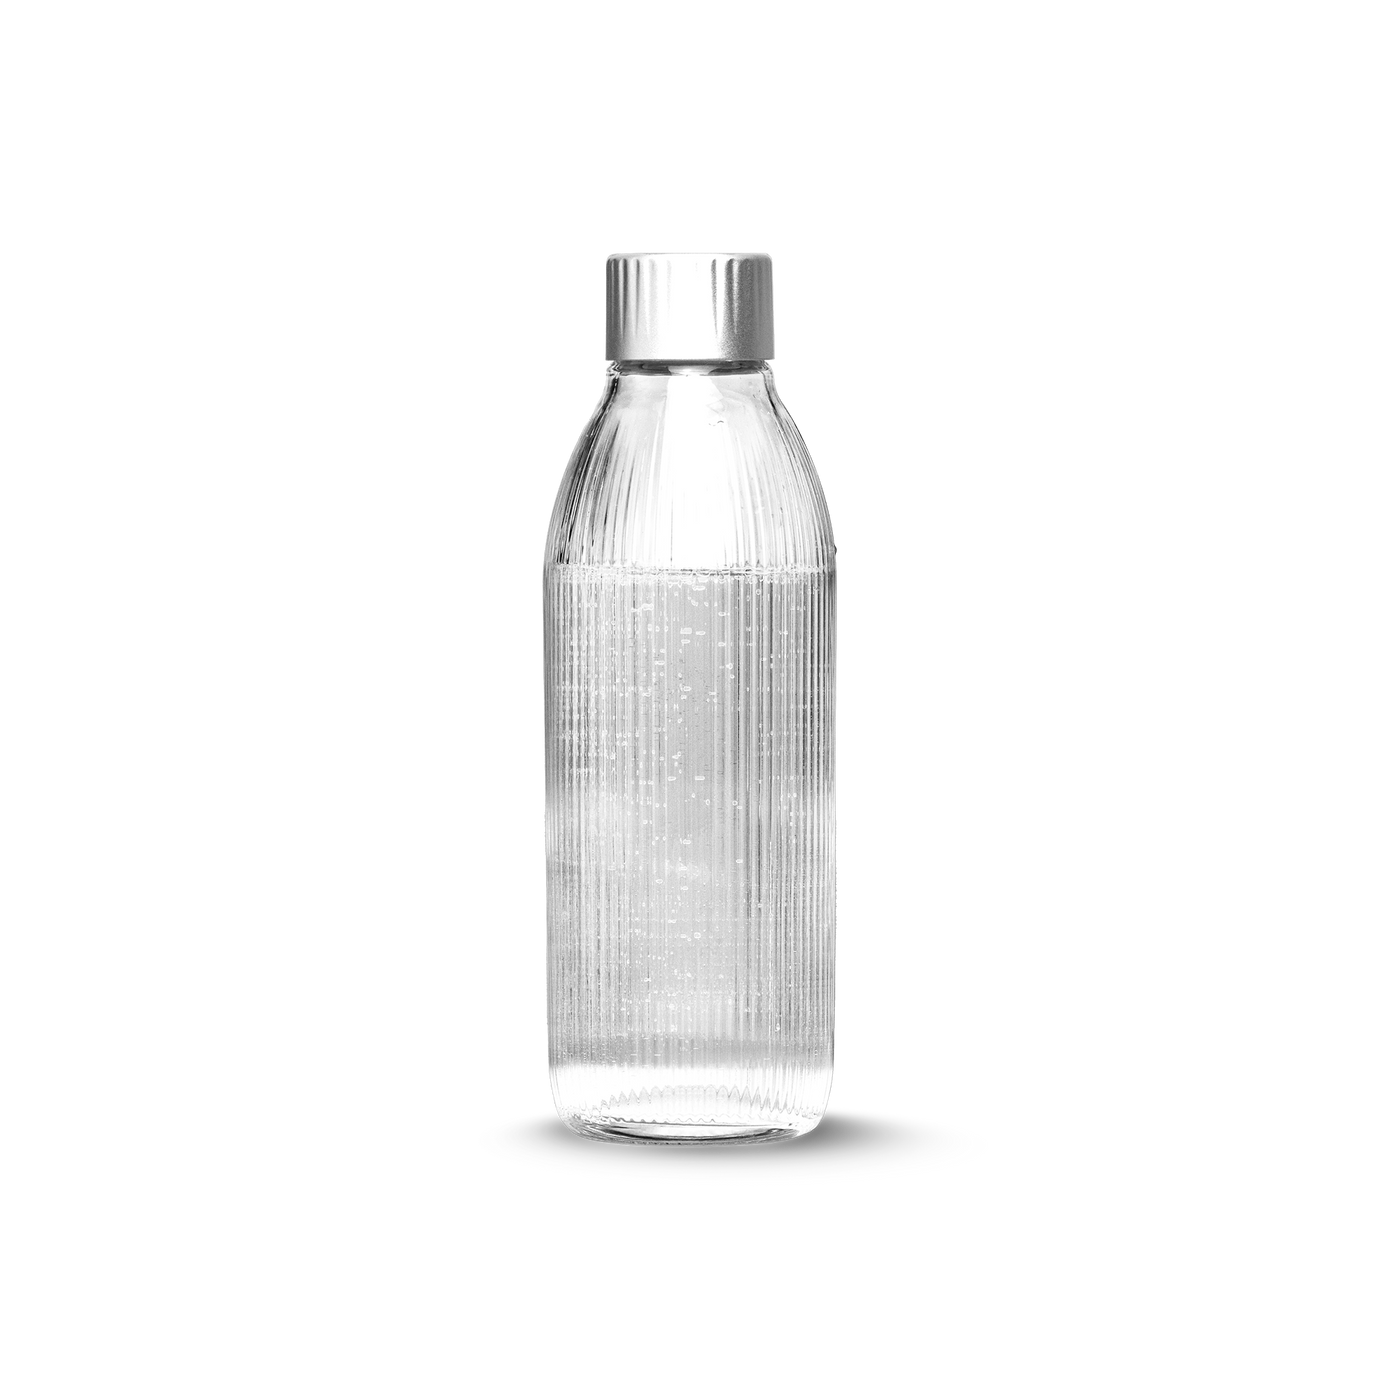 A Mysoda glass bottle with silver lid made of stainless steel